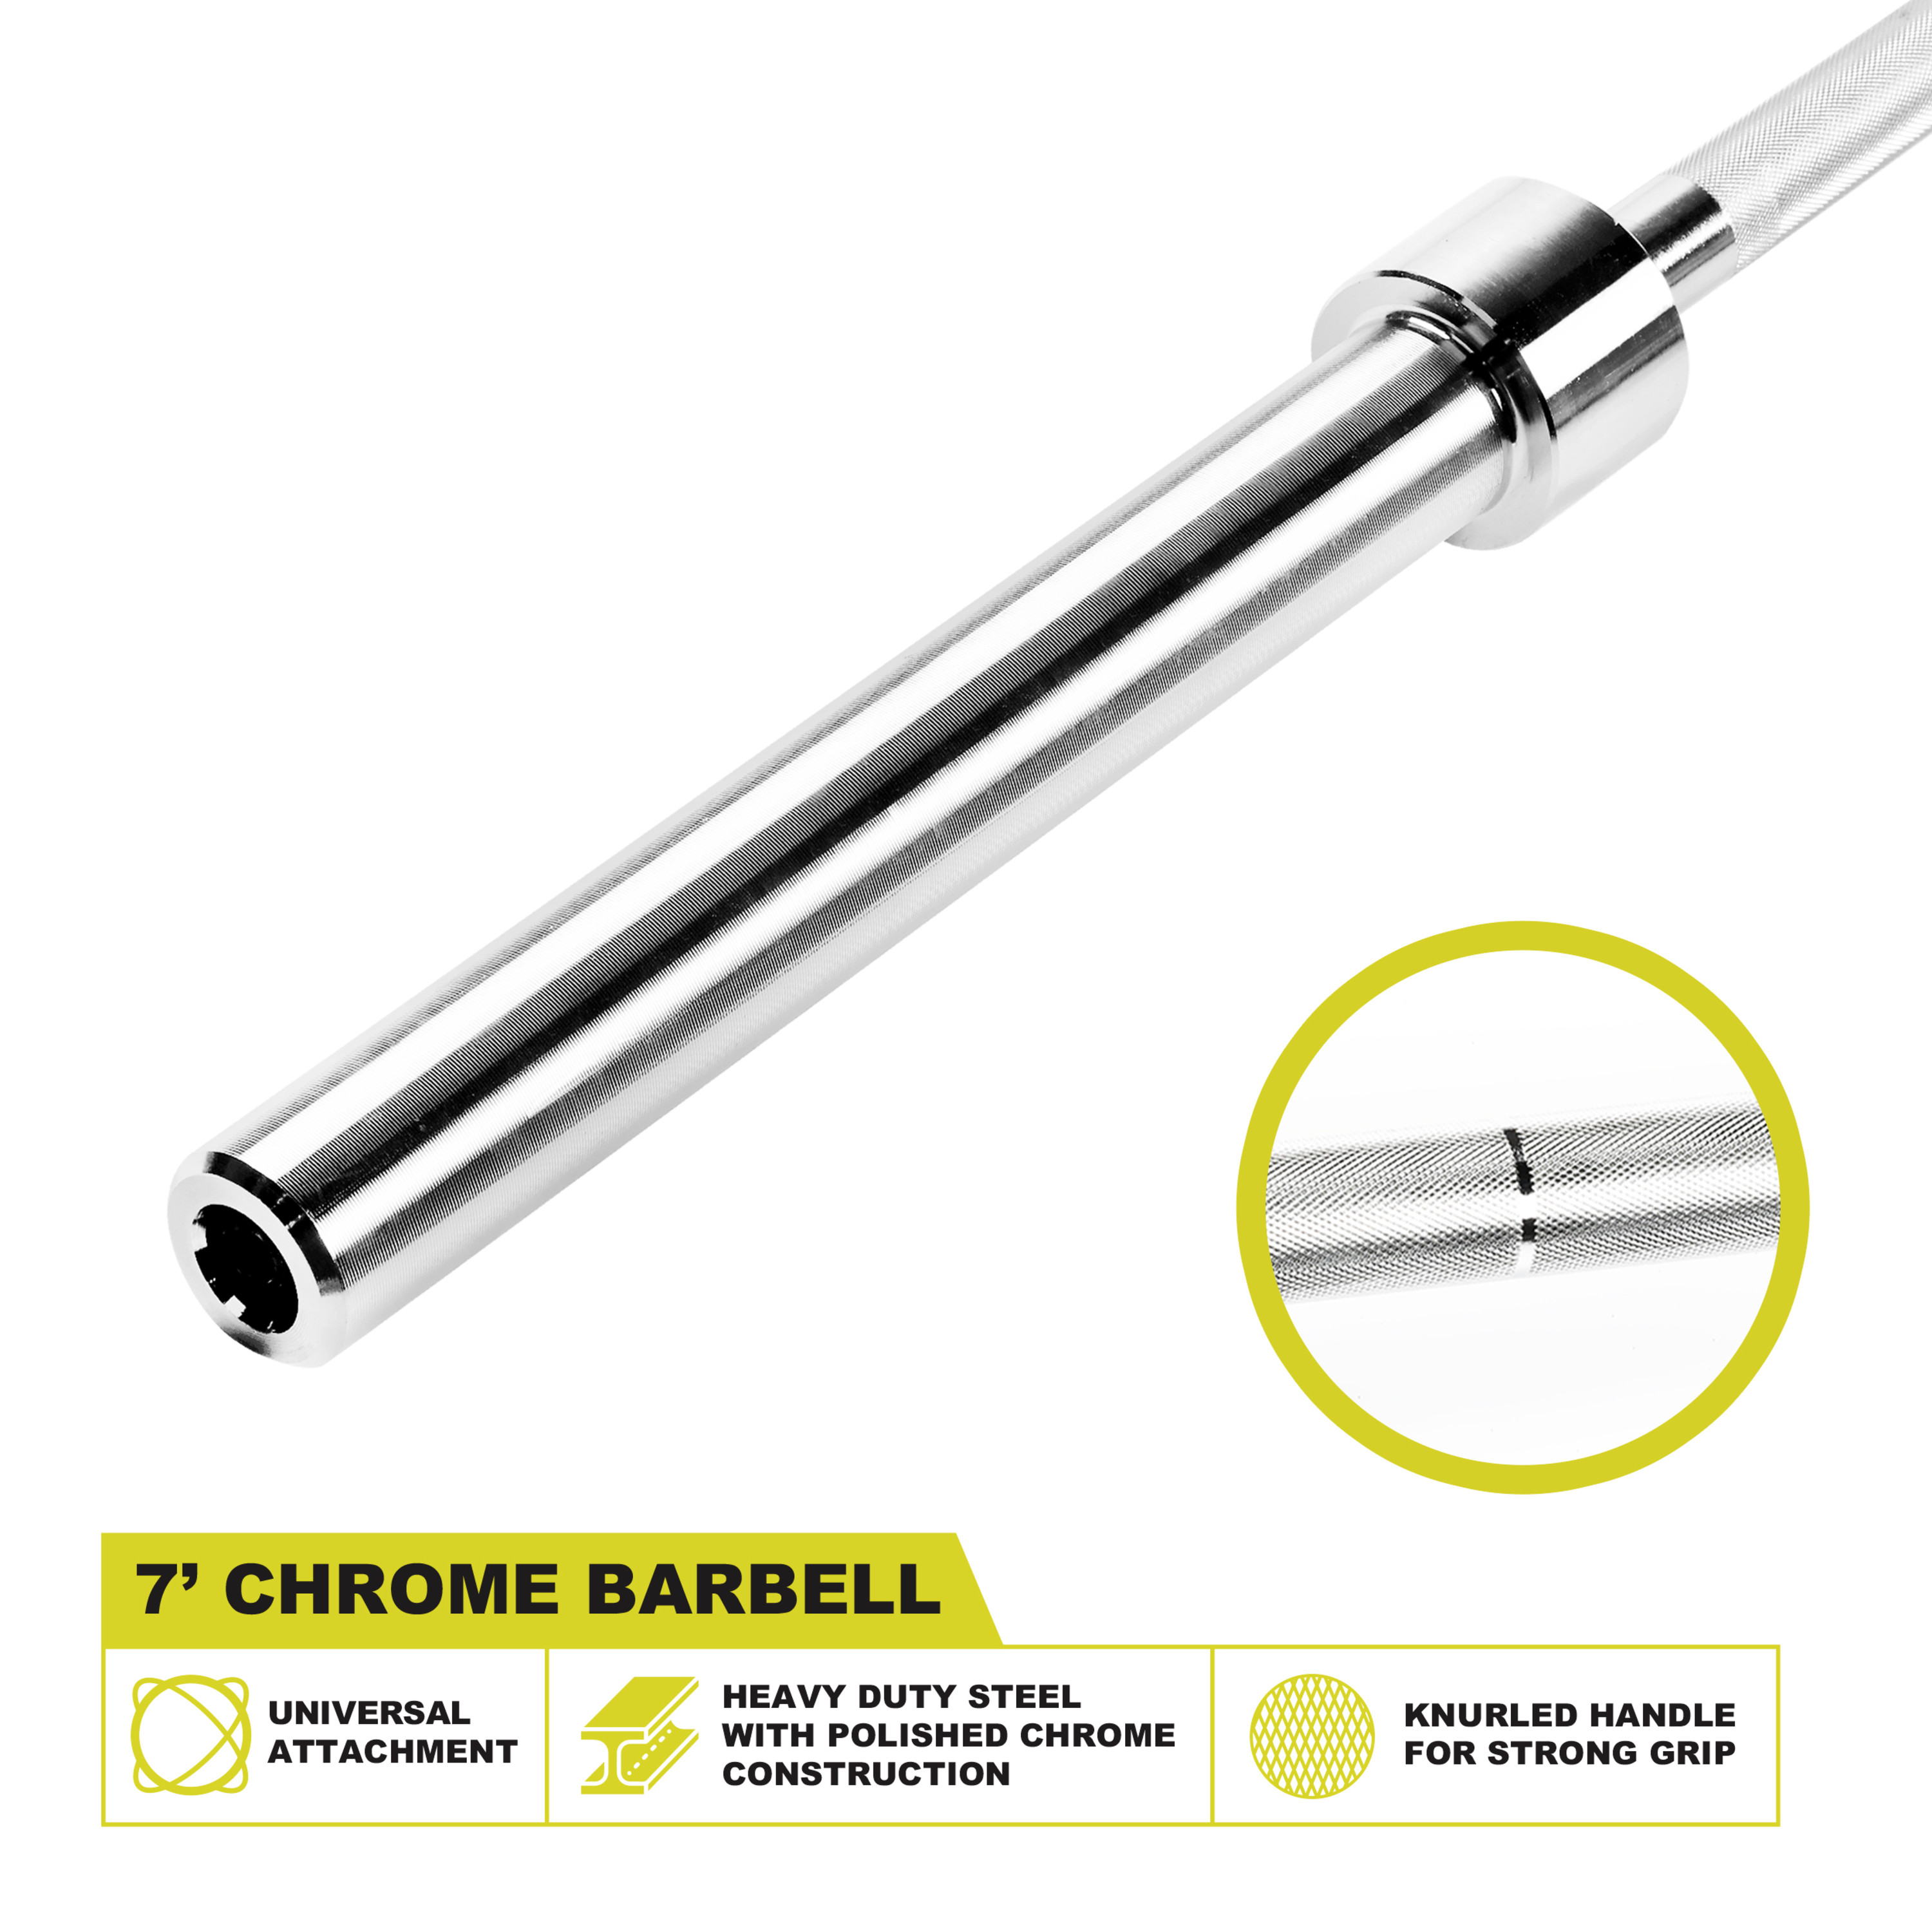 PRCTZ 7 ft Olympic Barbell with 2 In. Sleeve Diameter, 45 Pound Weighted Barbell with 800-Pound Capacity, Available in Black and Chrome - image 5 of 10